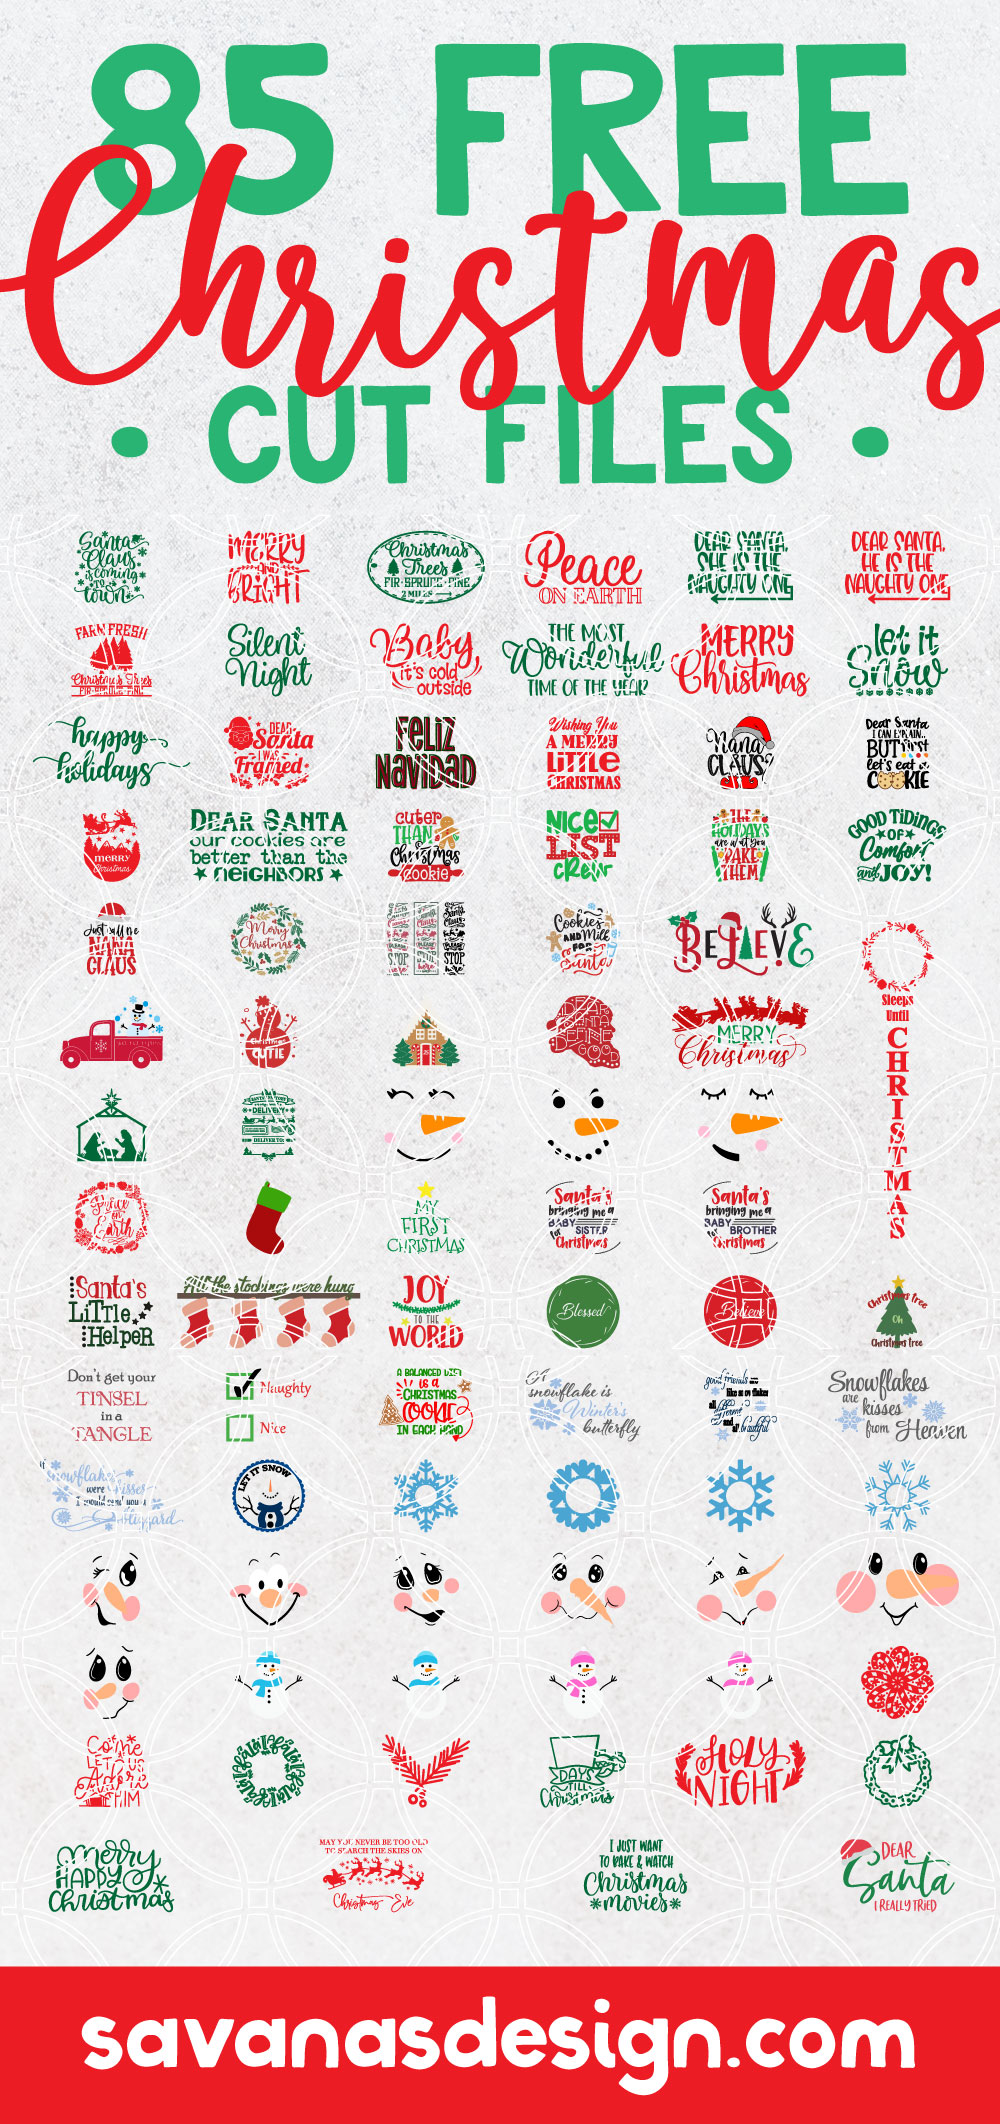 85 Free Christmas Cut Files - SVG EPS PNG DXF Cut Files for Cricut and